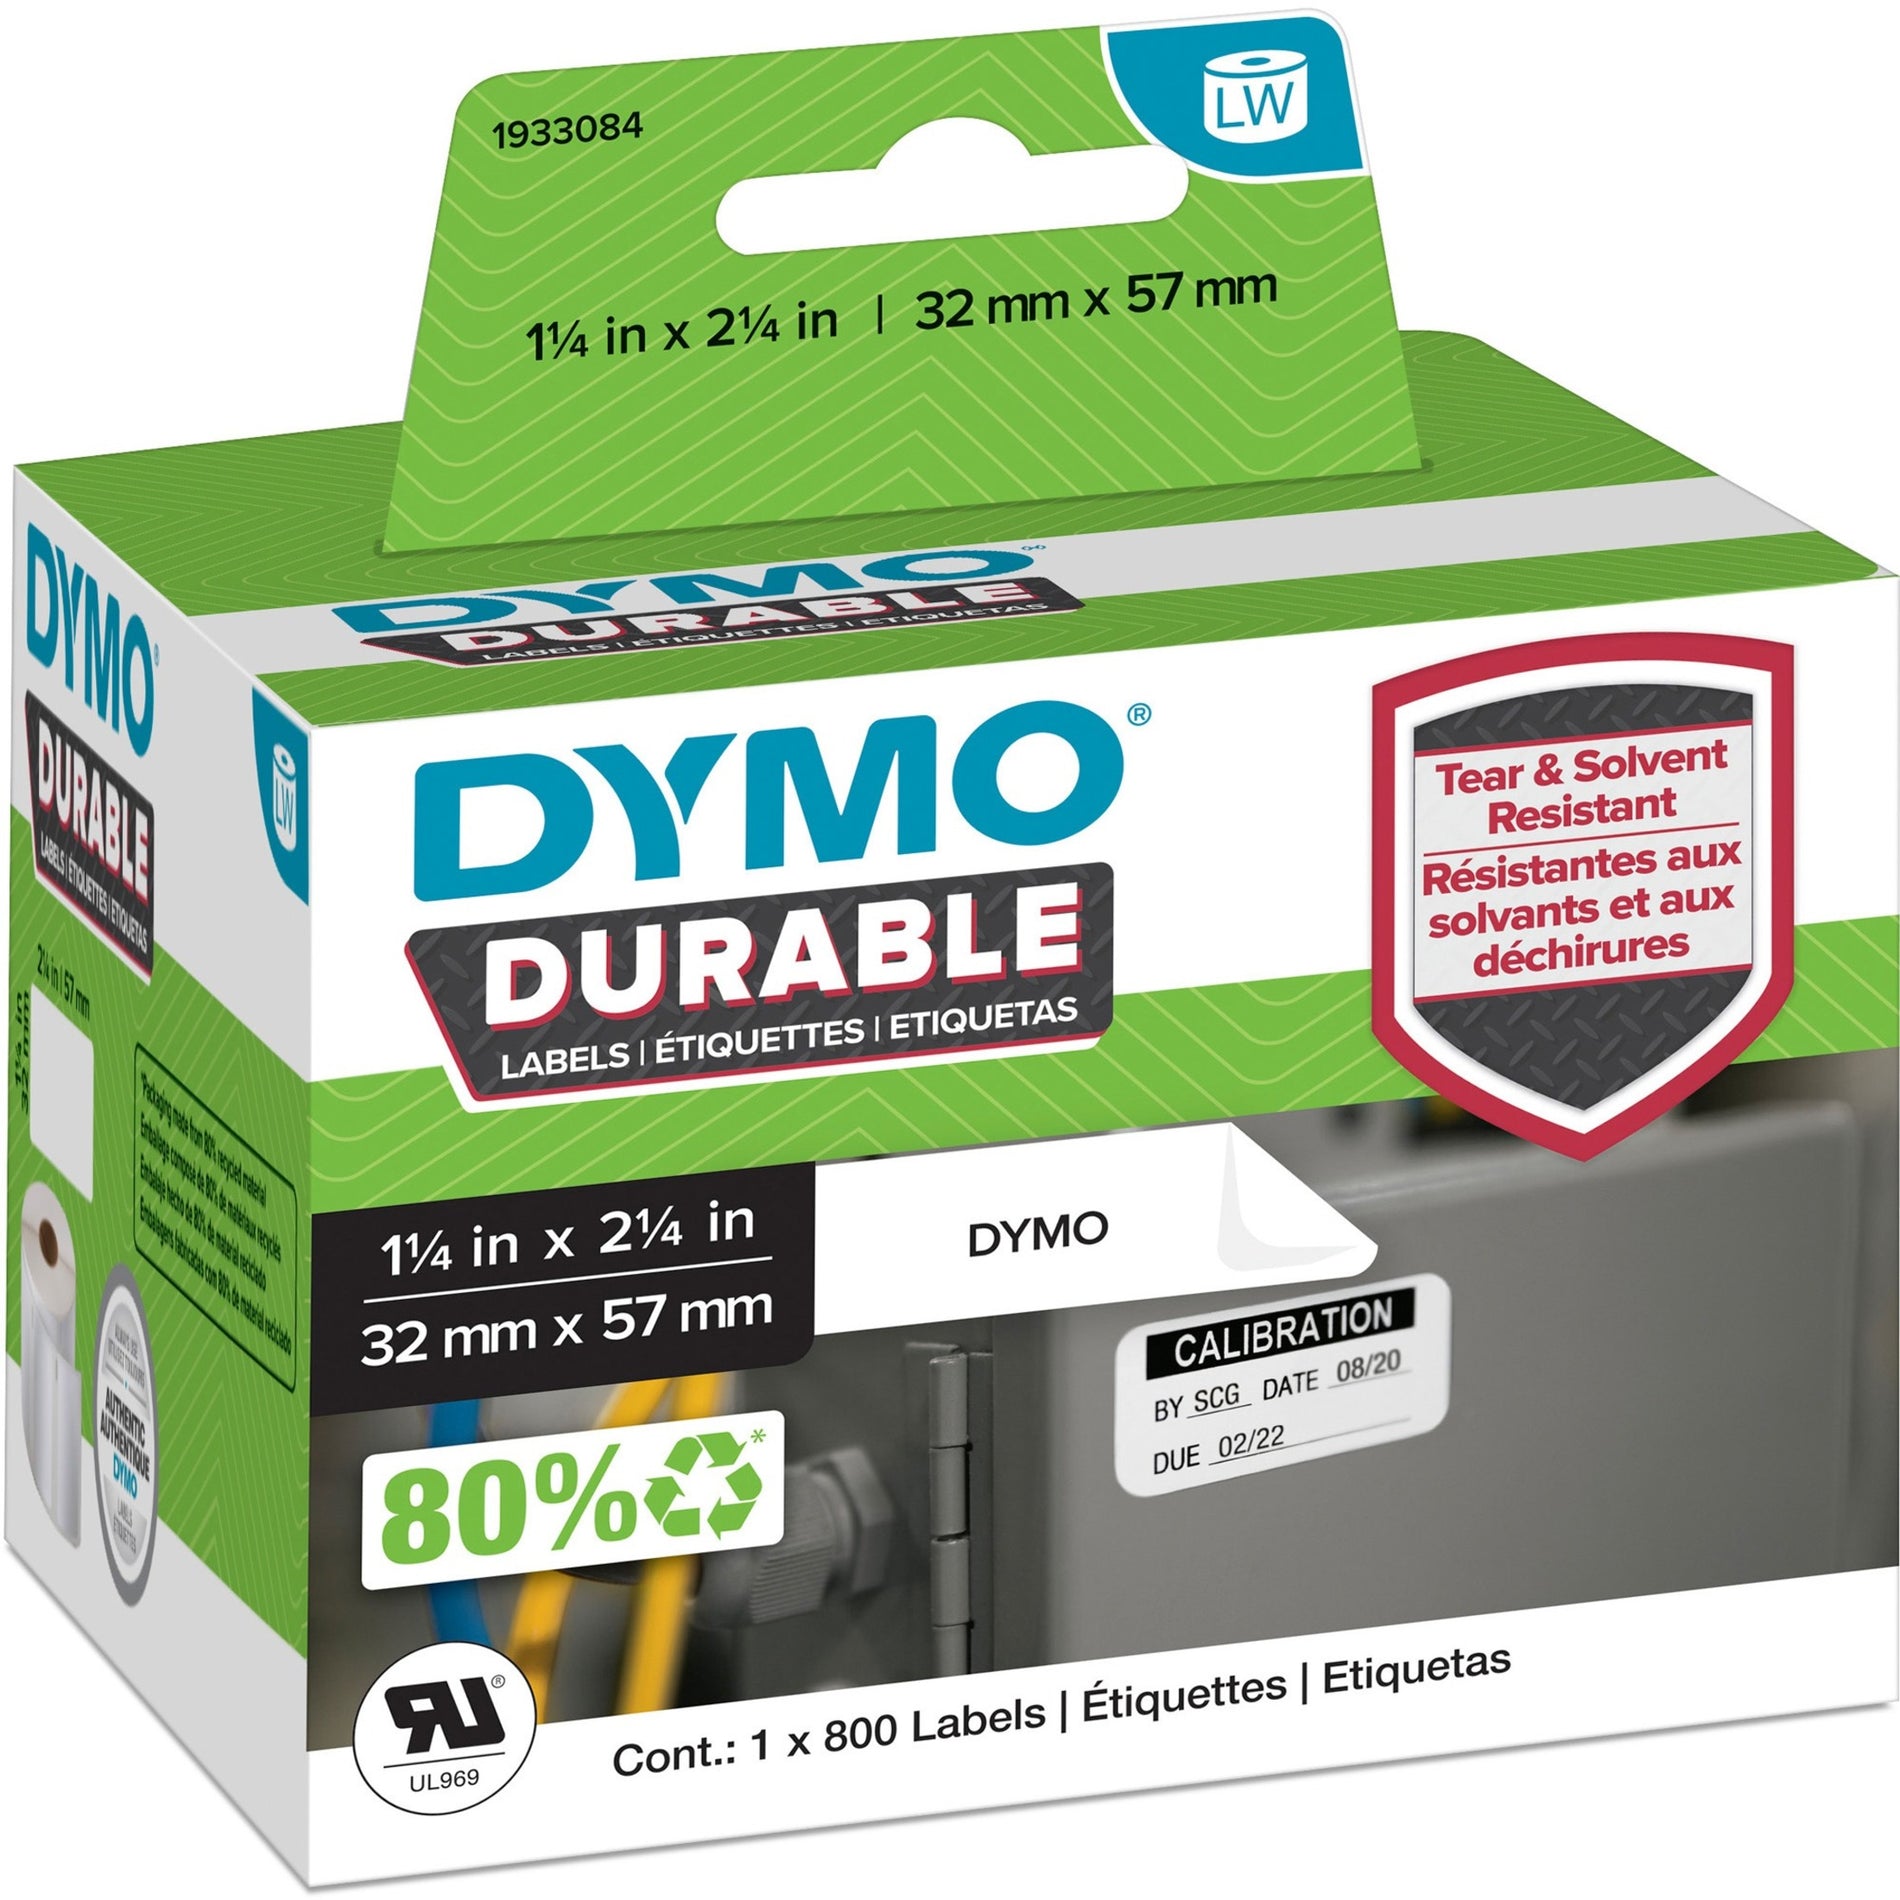 Dymo 1933084 LW Durable Labels, Rectangle, 2 1/4", White, Water Resistant, Moisture Resistant